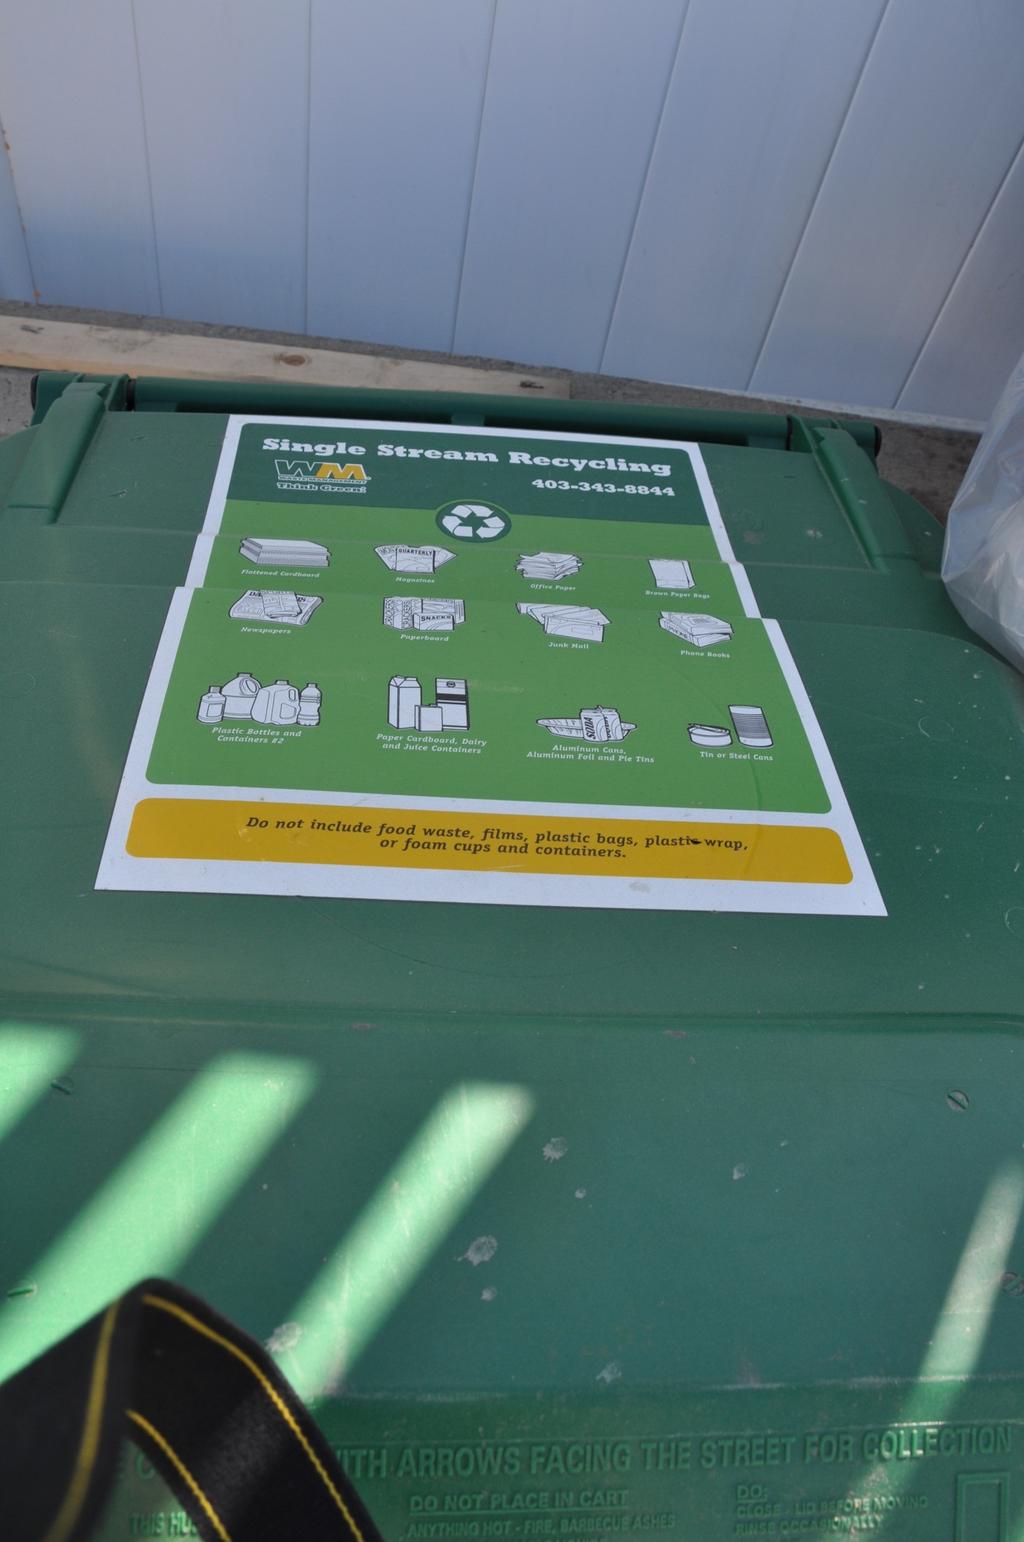 sonnevera international corp. It is also important to maintain signage and bins in good condition. Users will tend to treat infrastructure with greater respect if it is well maintained.